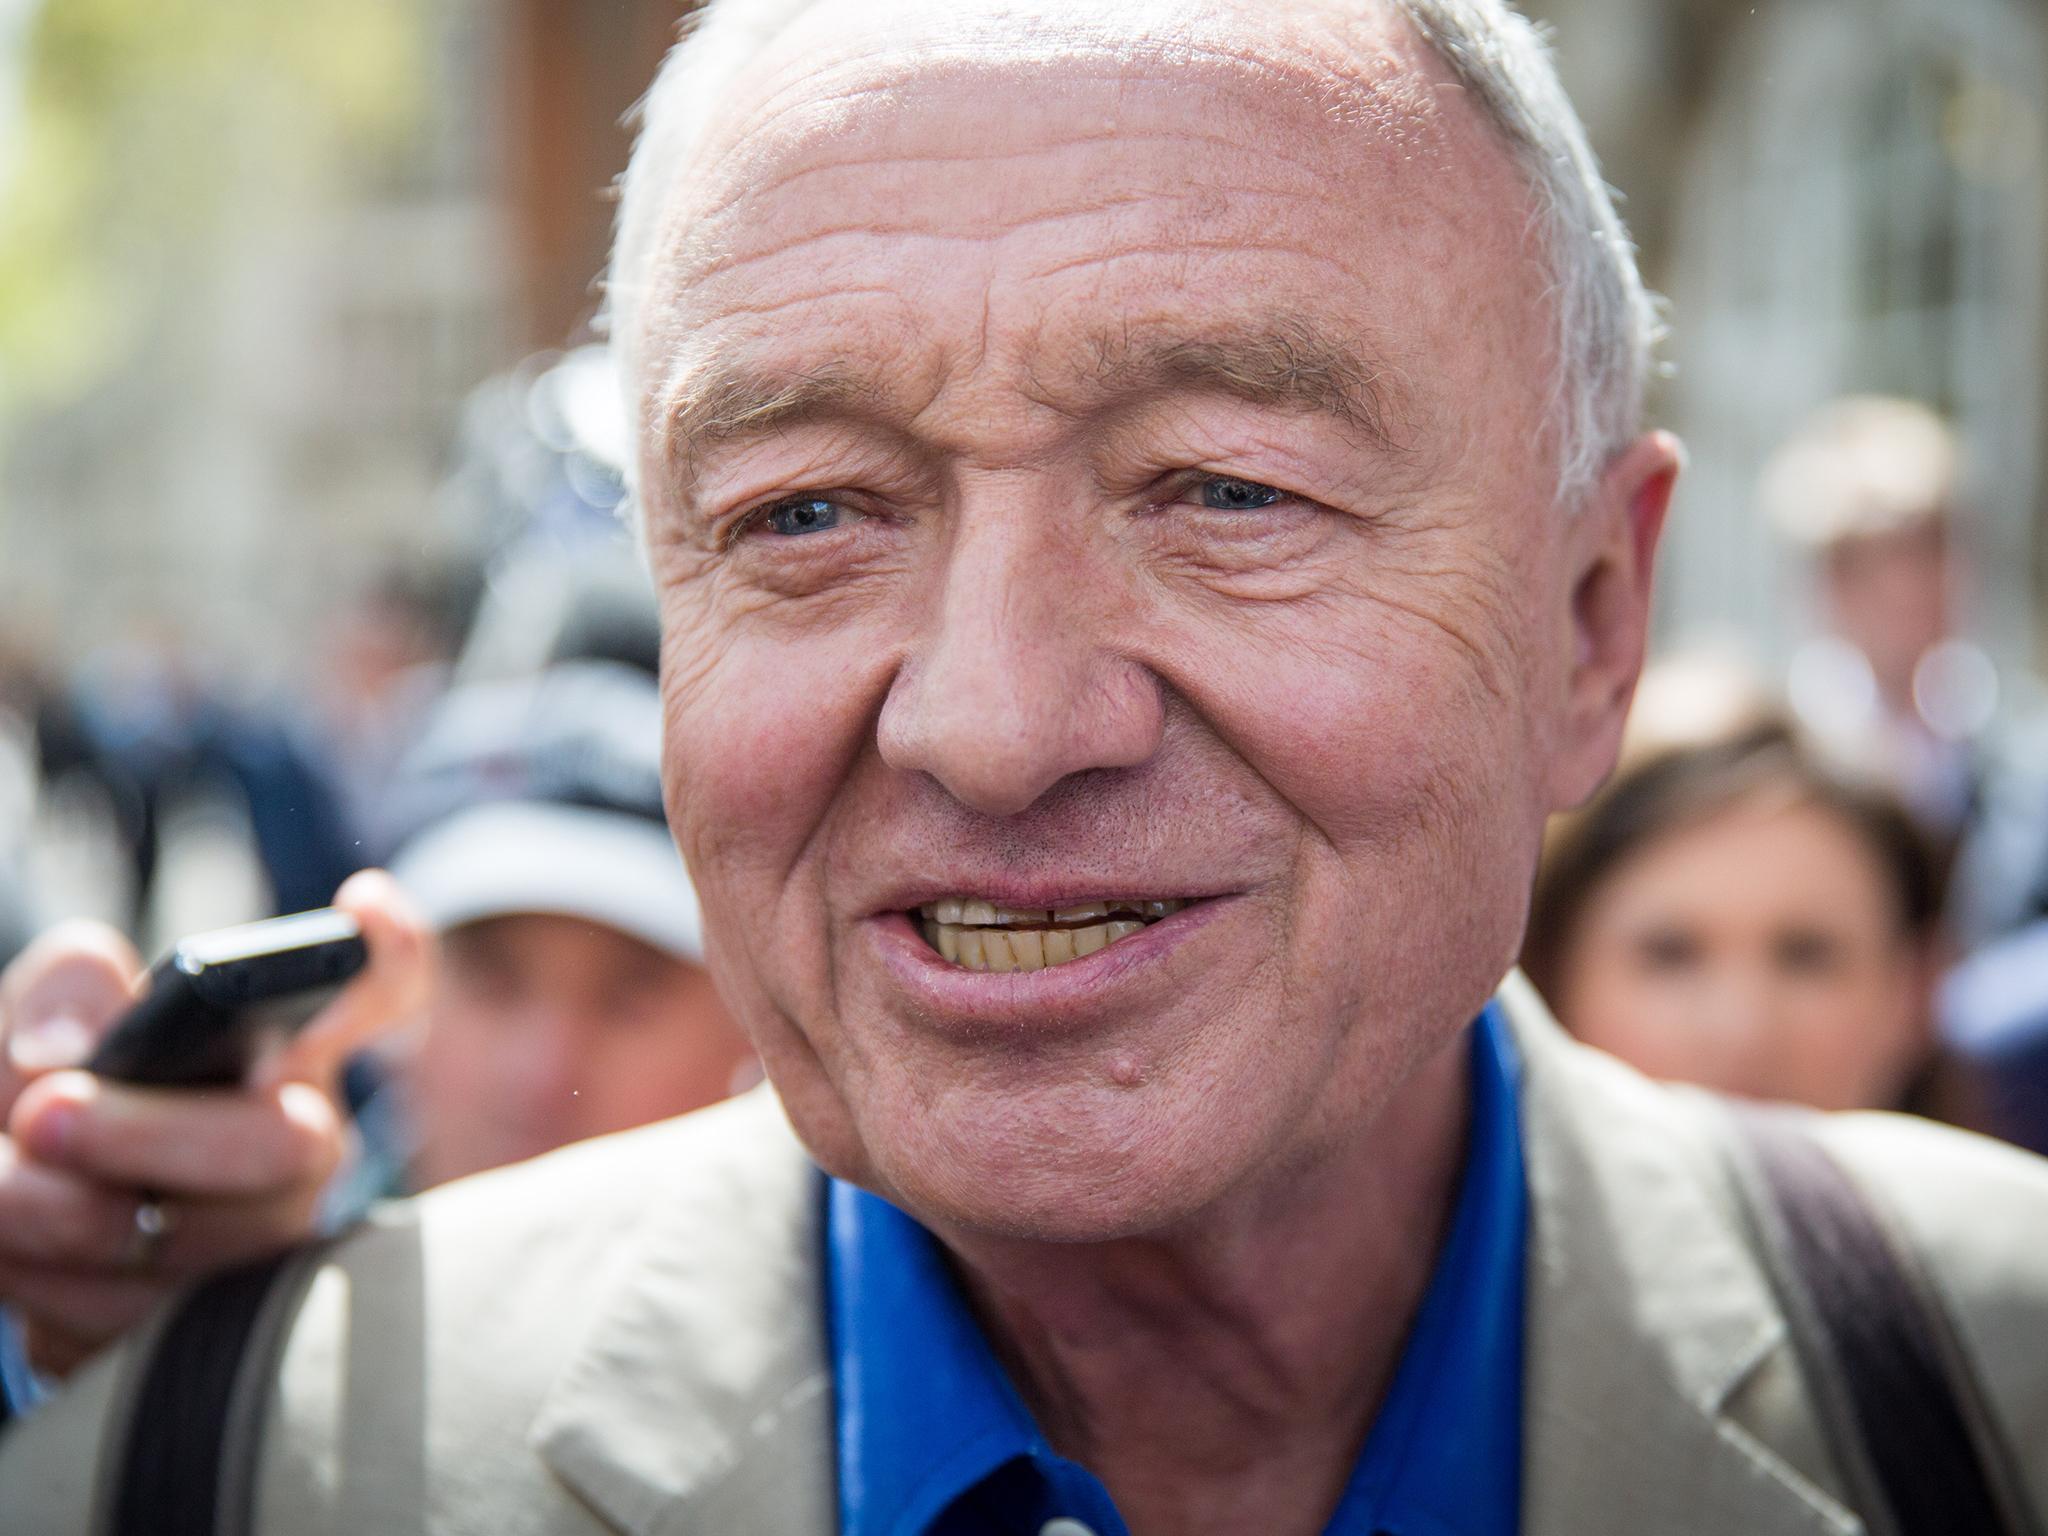 Ken Livingstone is facing disciplinary charges after claiming Adolf Hitler supported Zionism